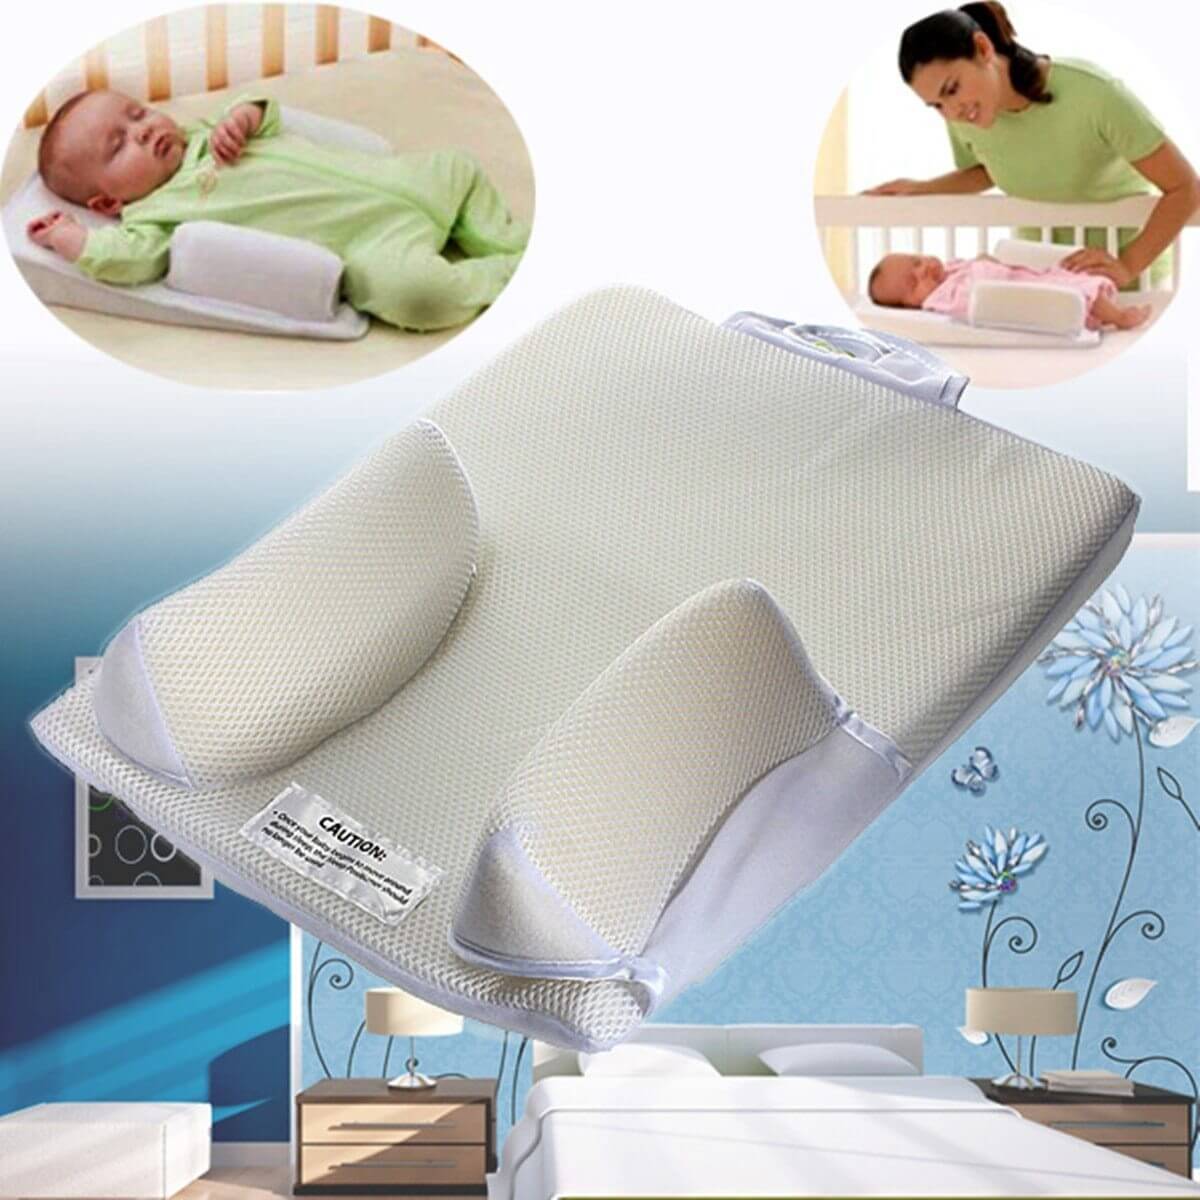 Baby Anti Roll Pillow